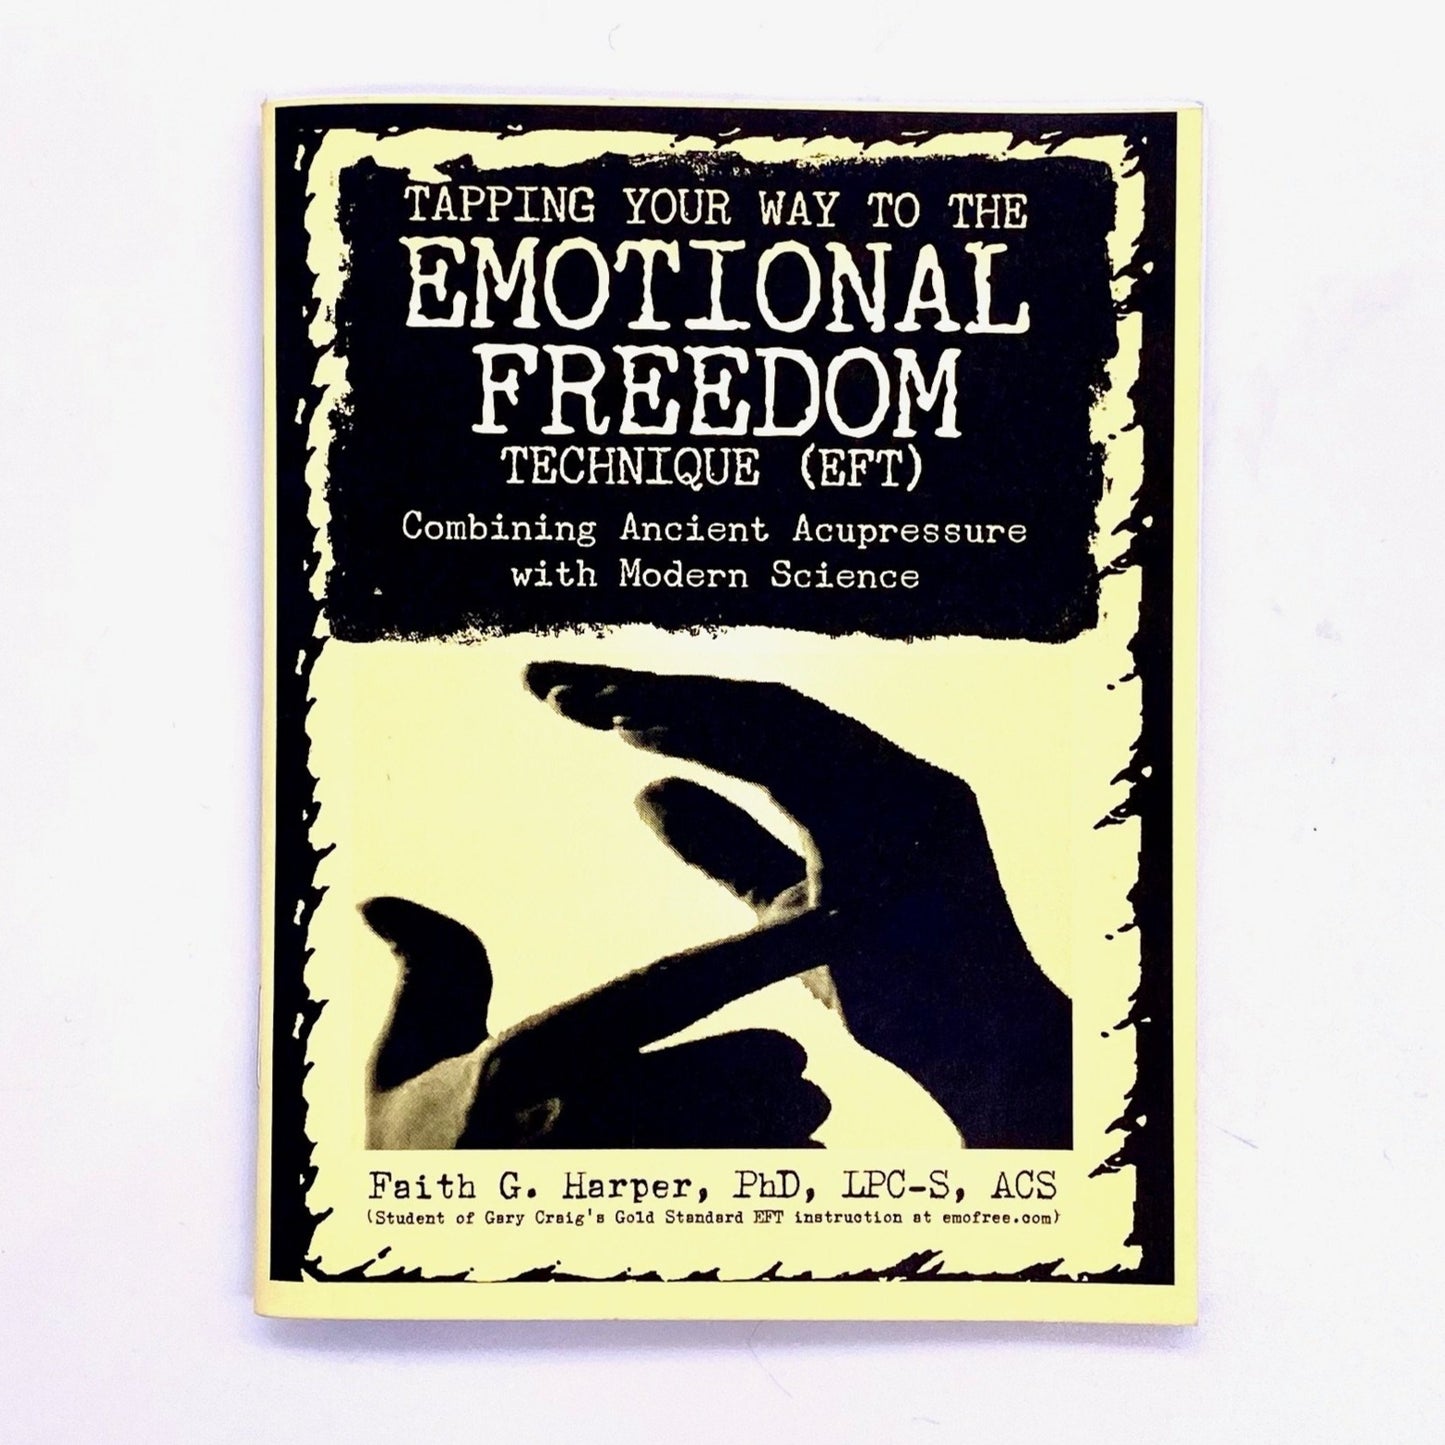 Cover of Emotional Freedom Technique by Faith G Harper.